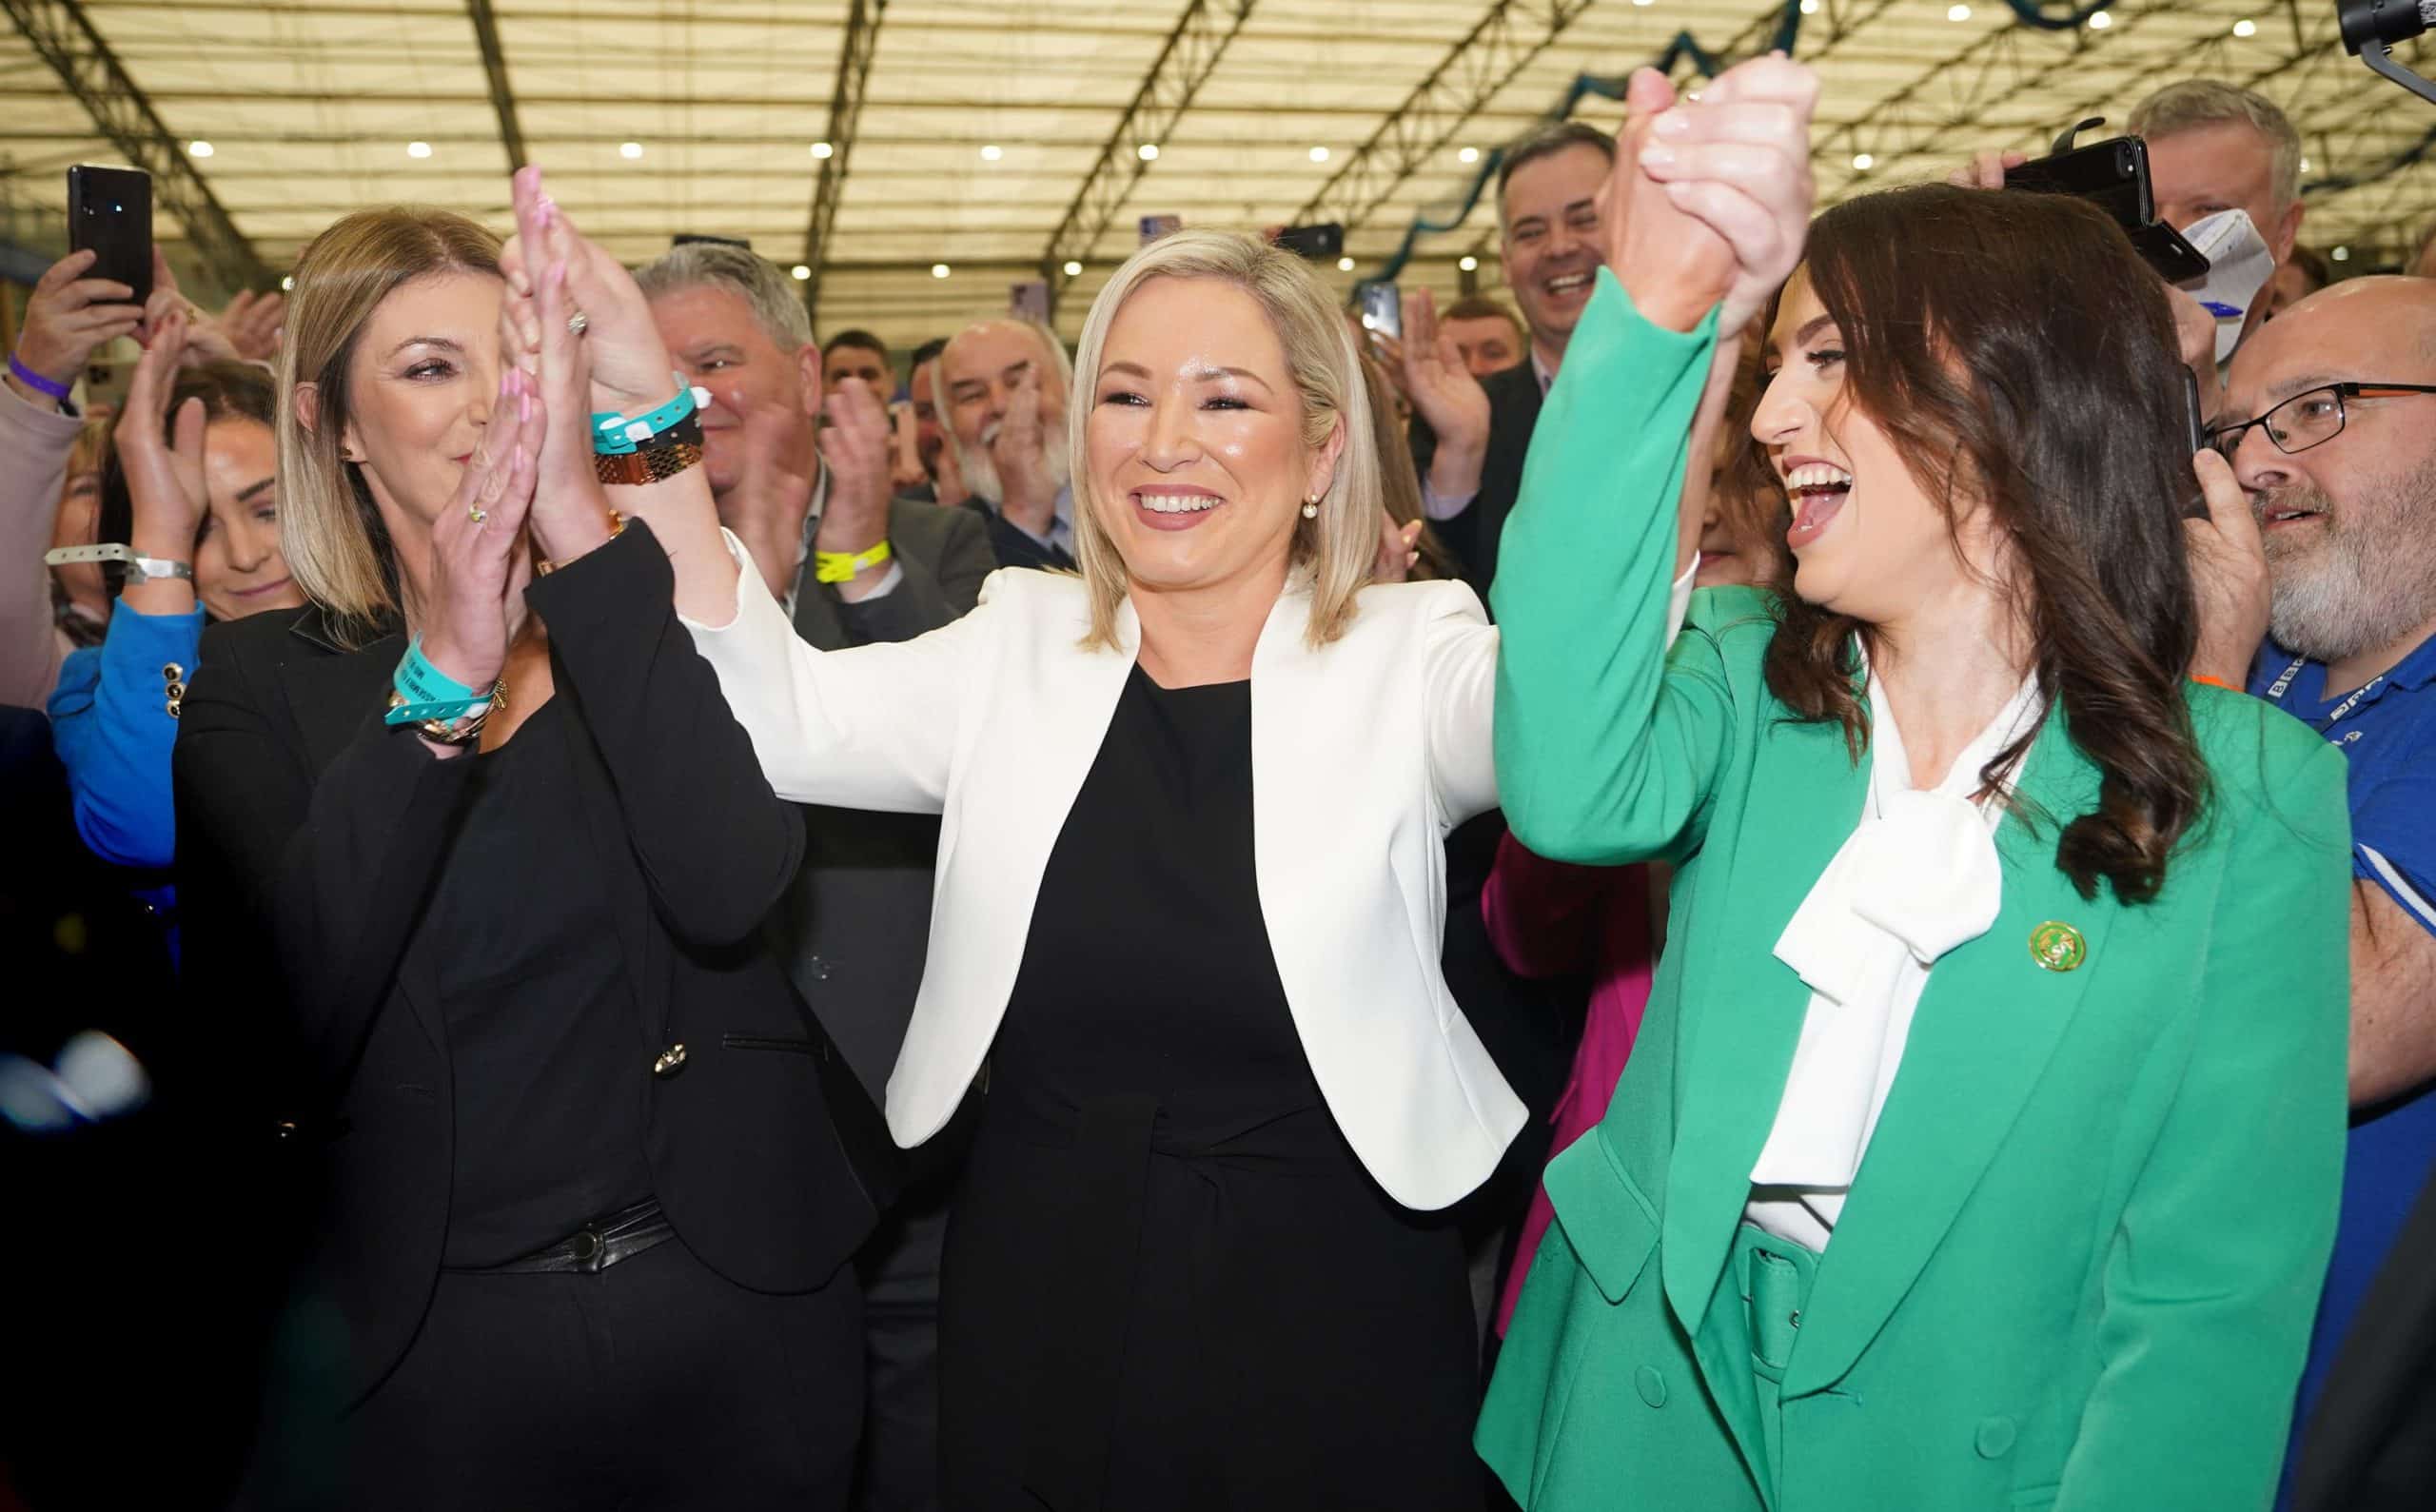 You were warned: Sinn Fein now largest party in Northern Ireland as SNP still dominant in Scotland